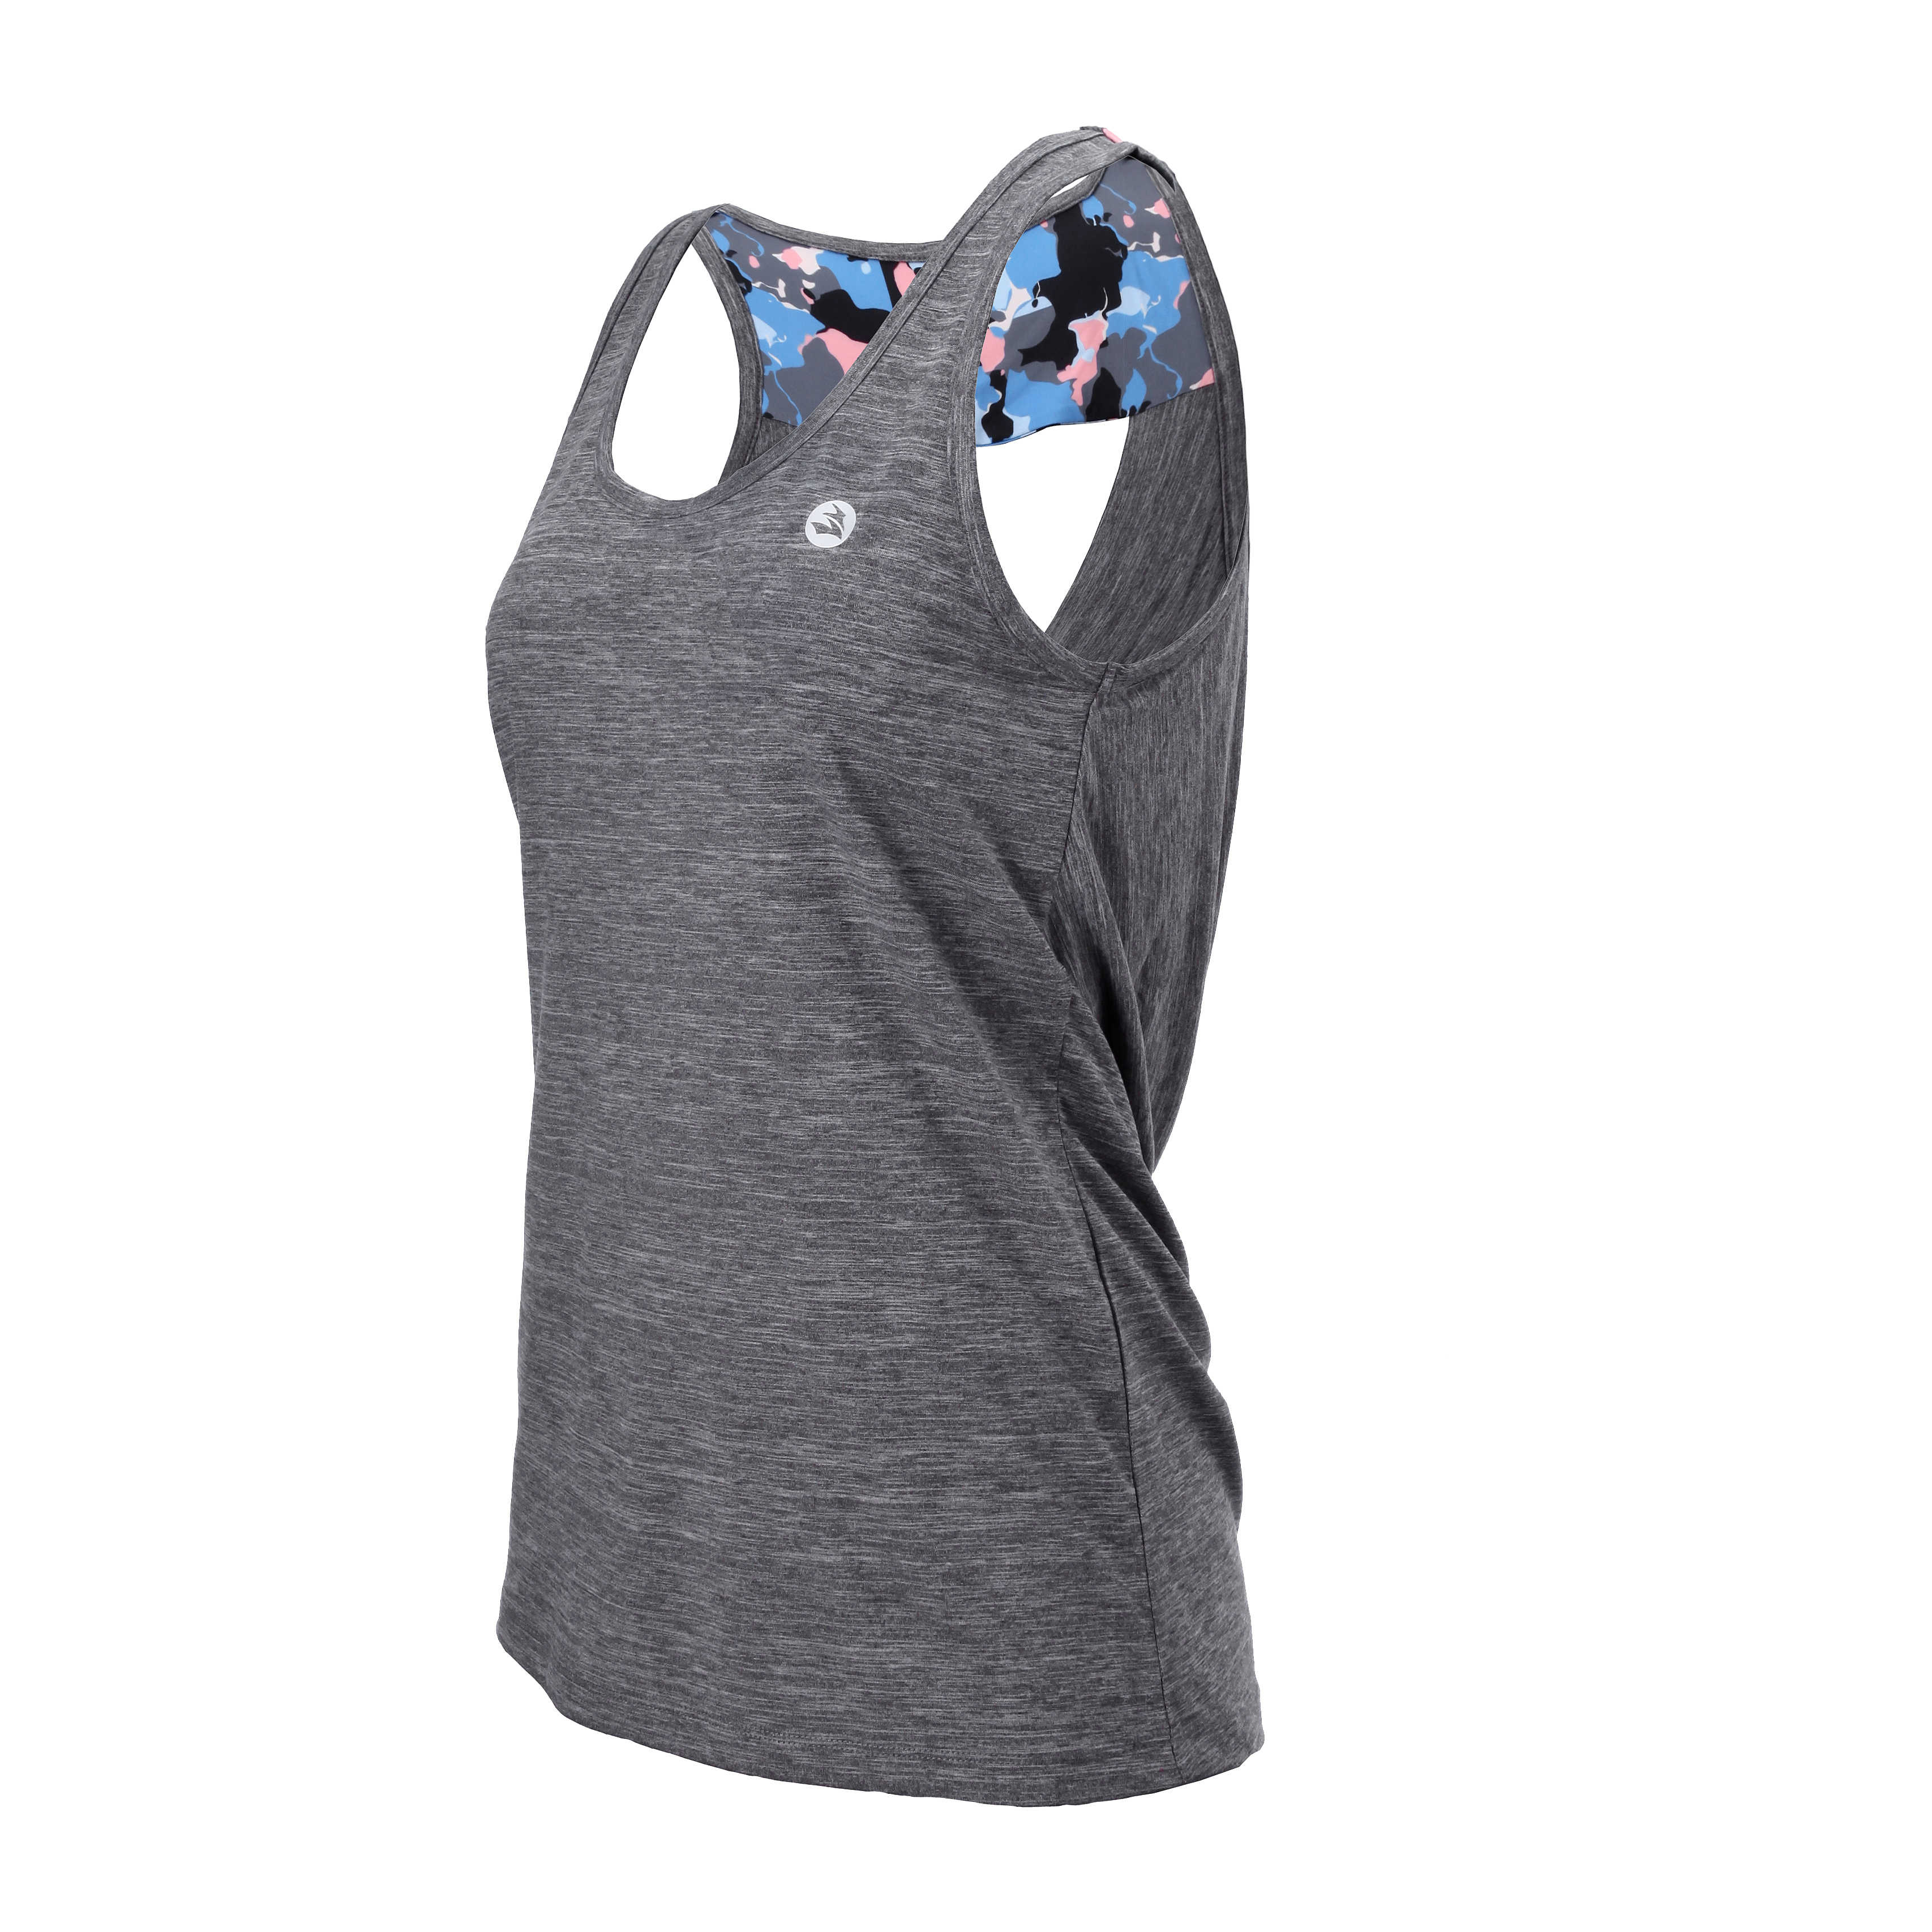 Women's Workout Tank Top Loose Fit Tops Running Athletic Shirts